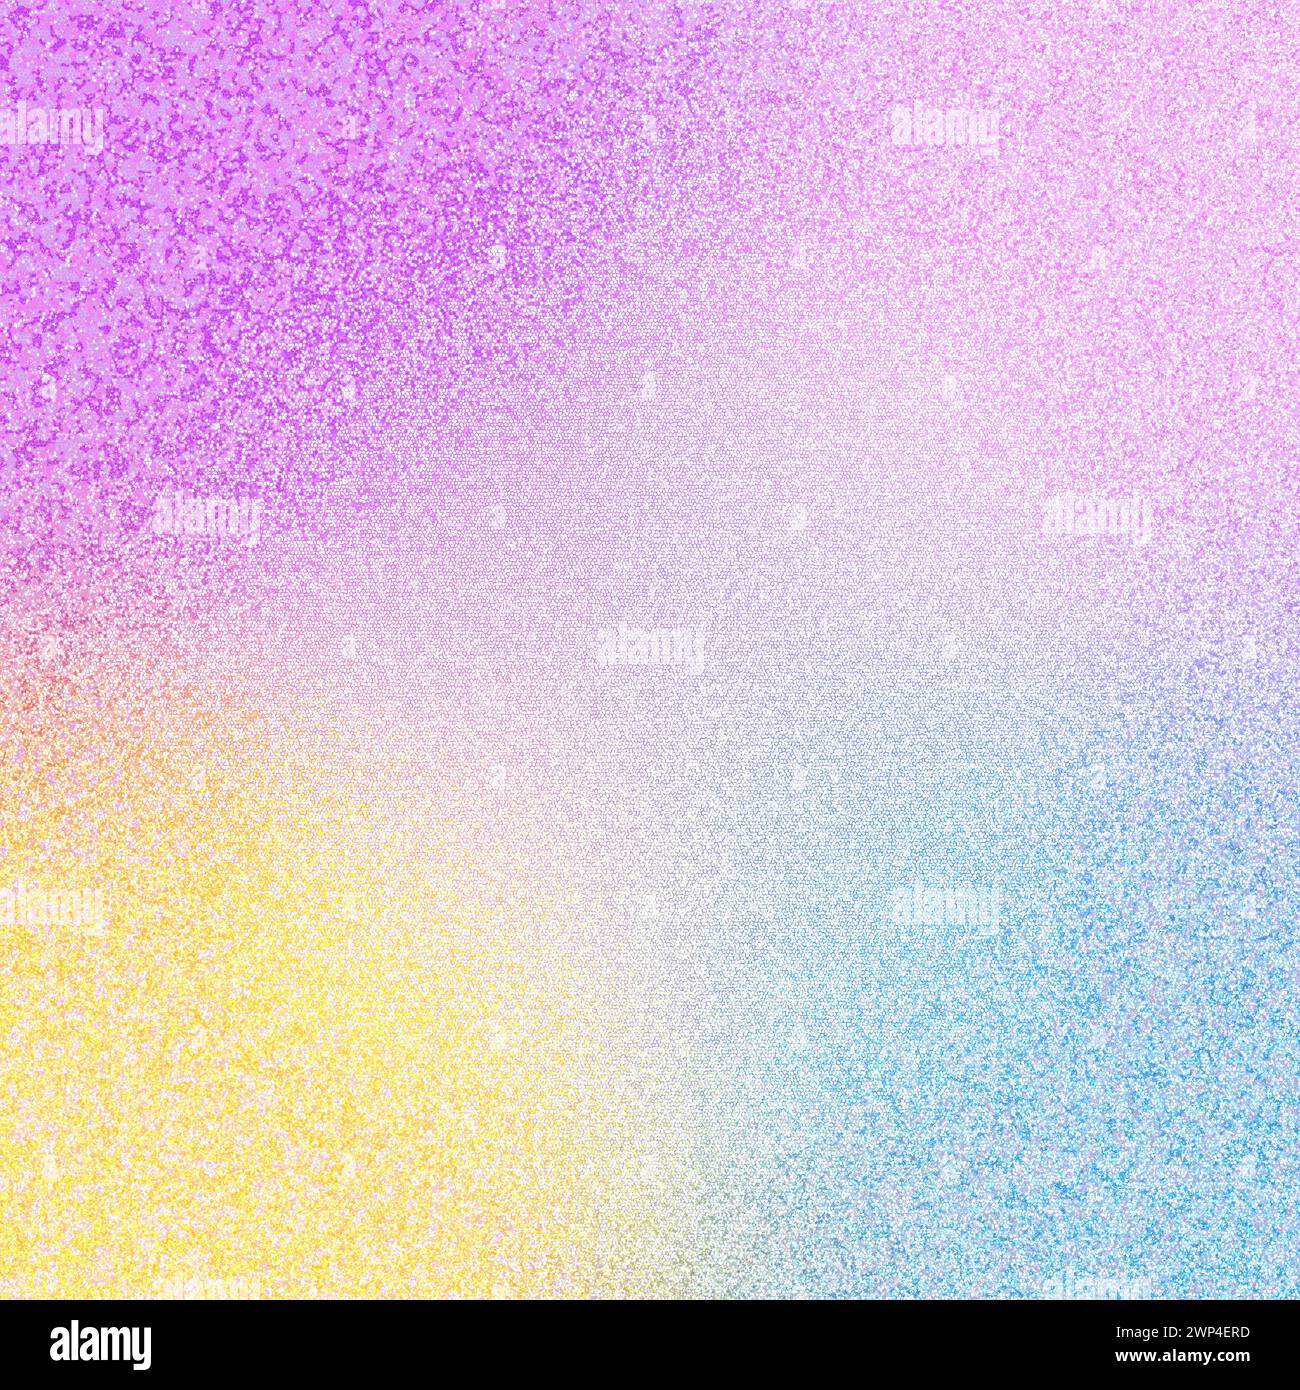 An abstract iridescent grainy grunge texture background image. Stock Photo